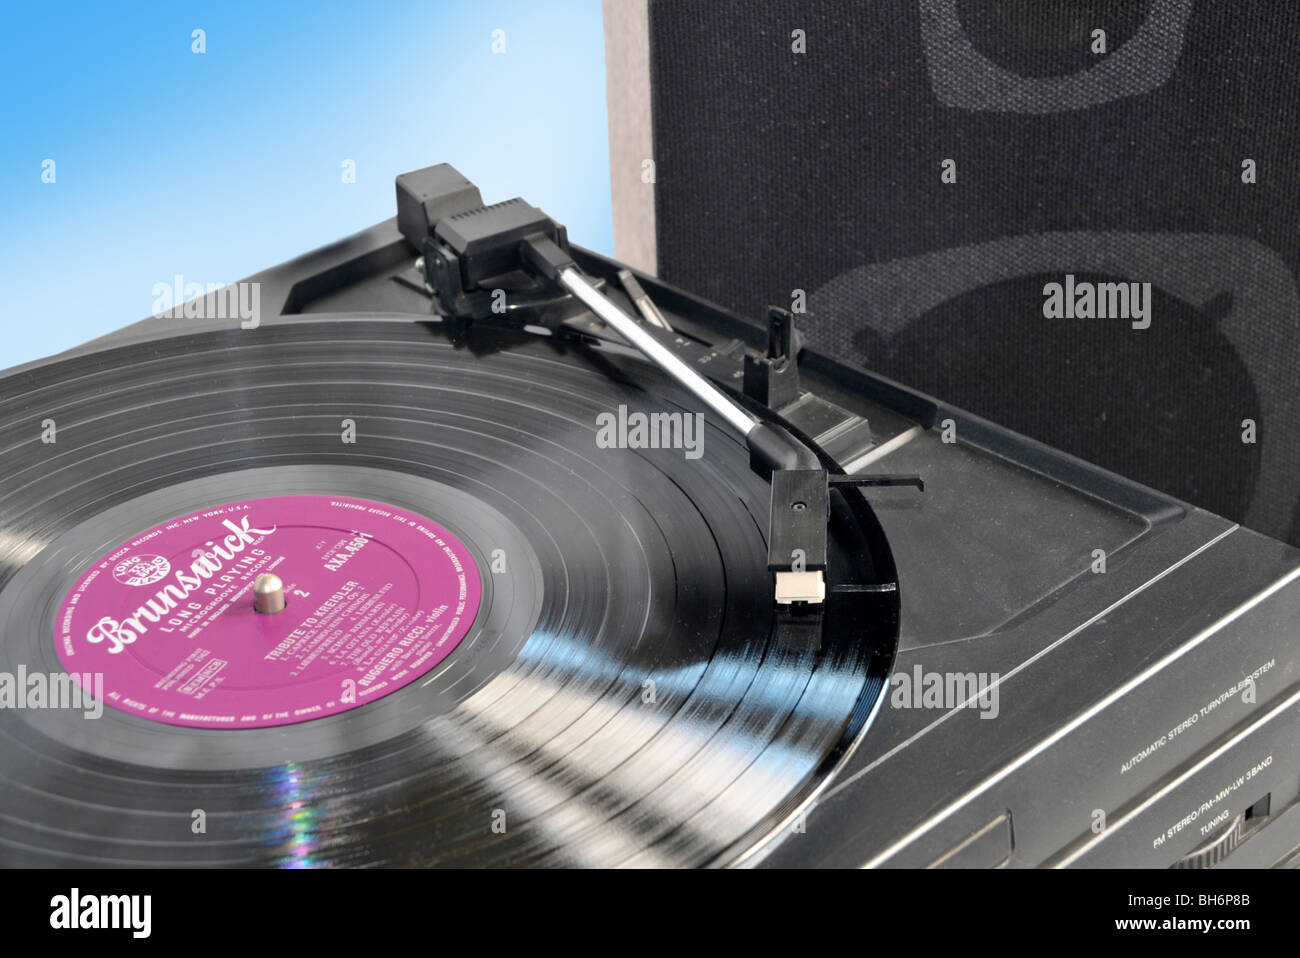 Looking down on an LP being played on a turntable with a speaker in the background. Stock Photo